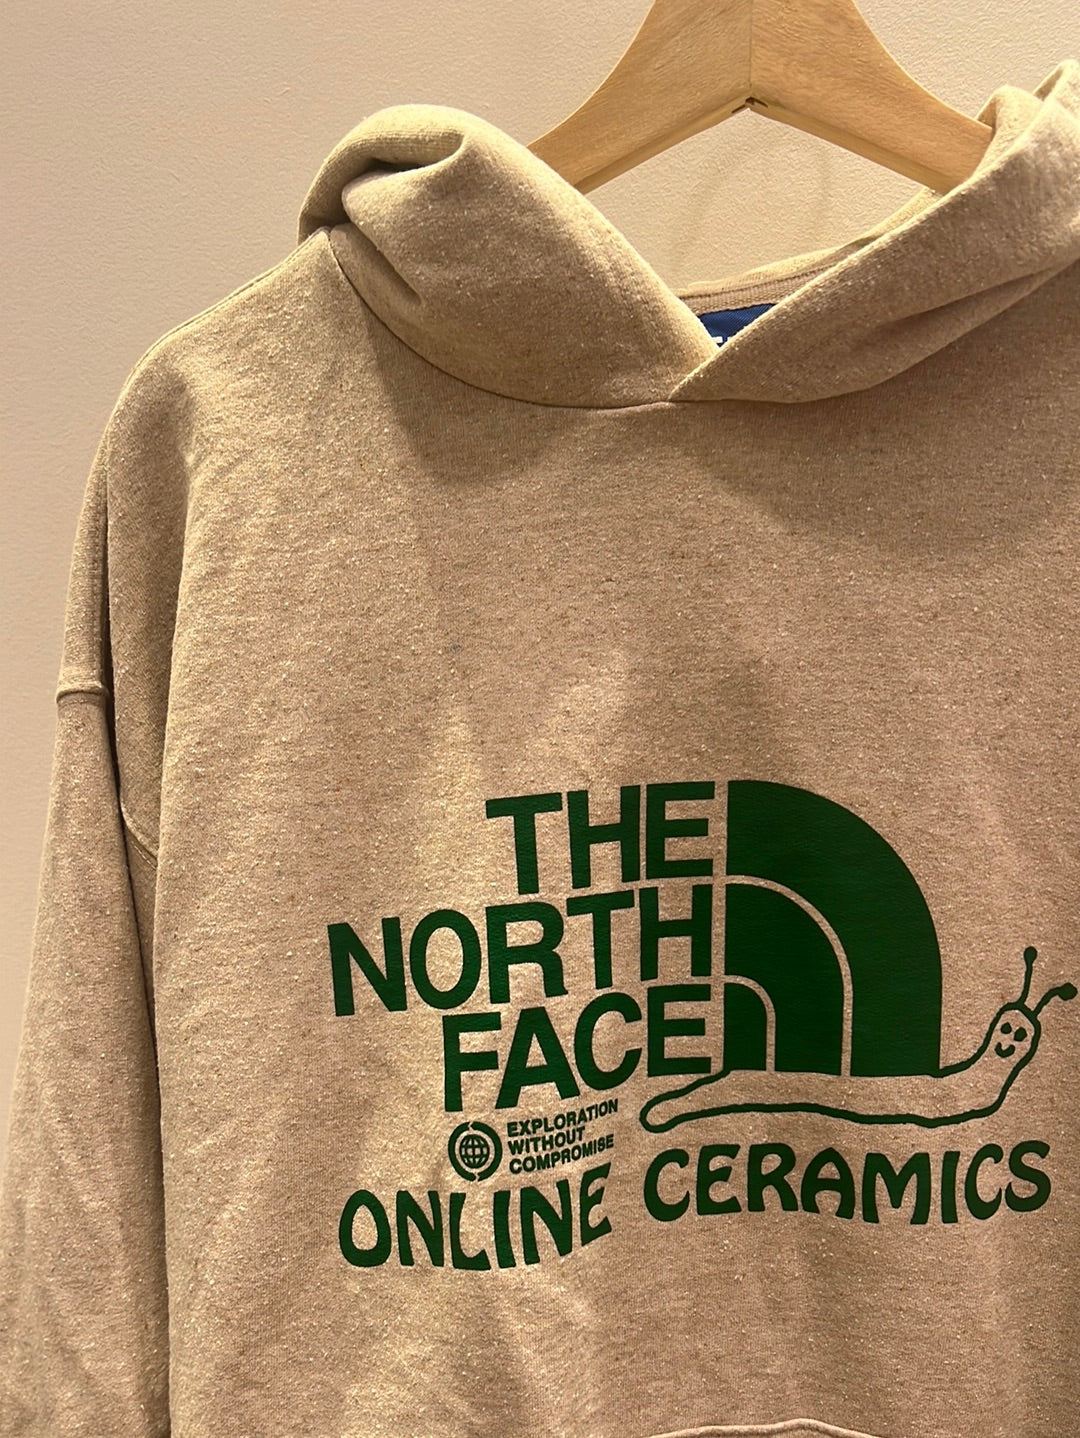 The North Face - x Online Ceramics hoodie